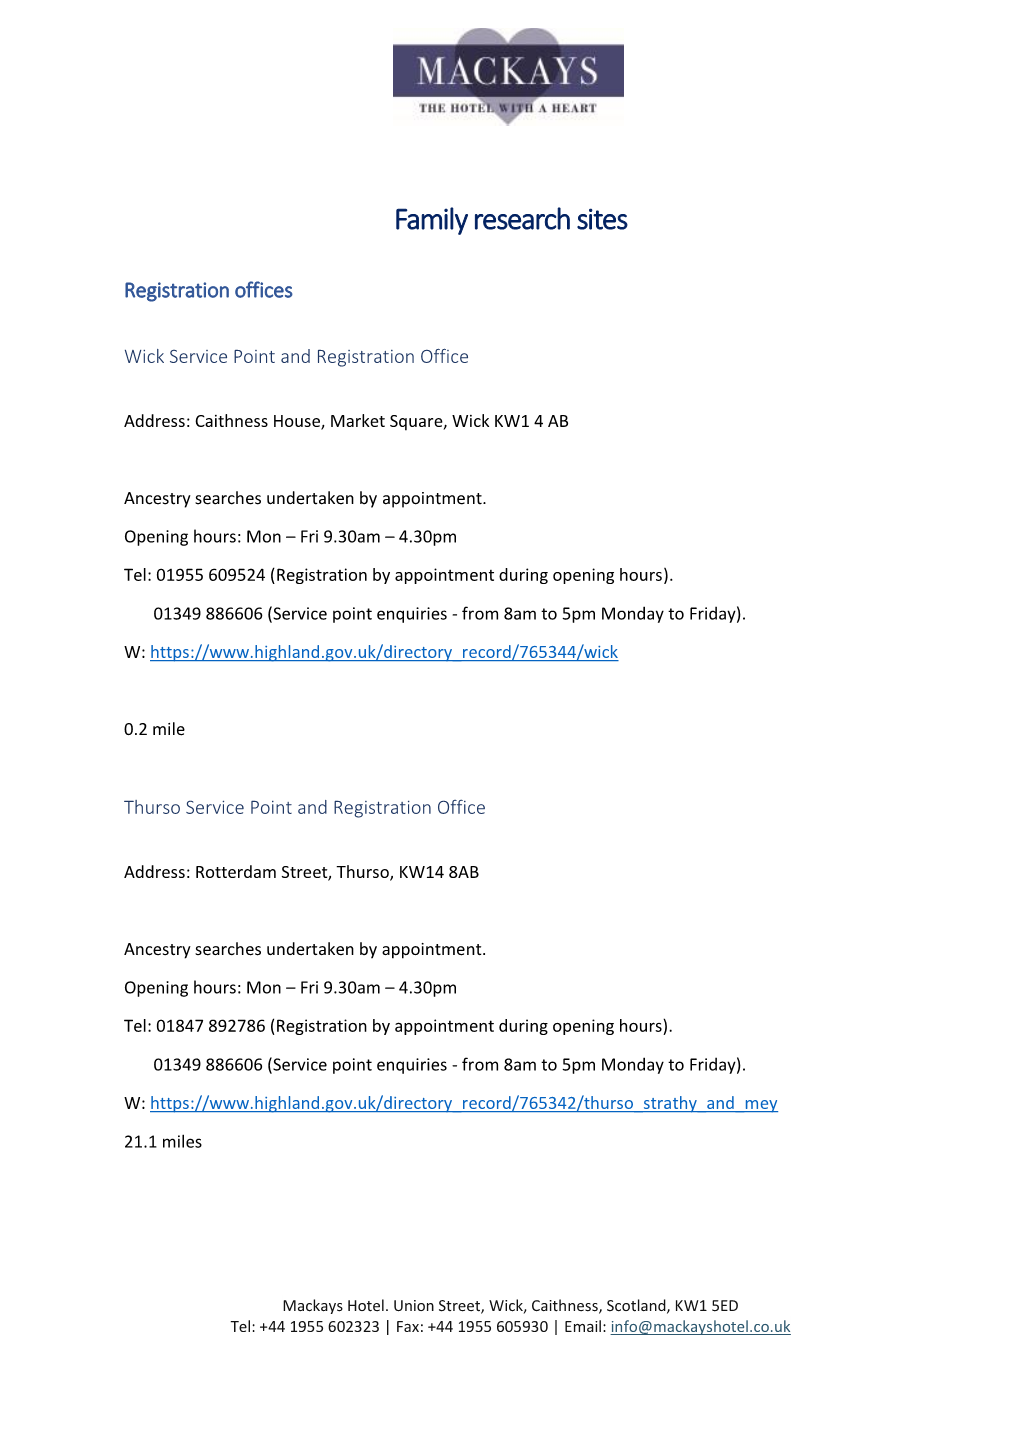 Family Research Sites